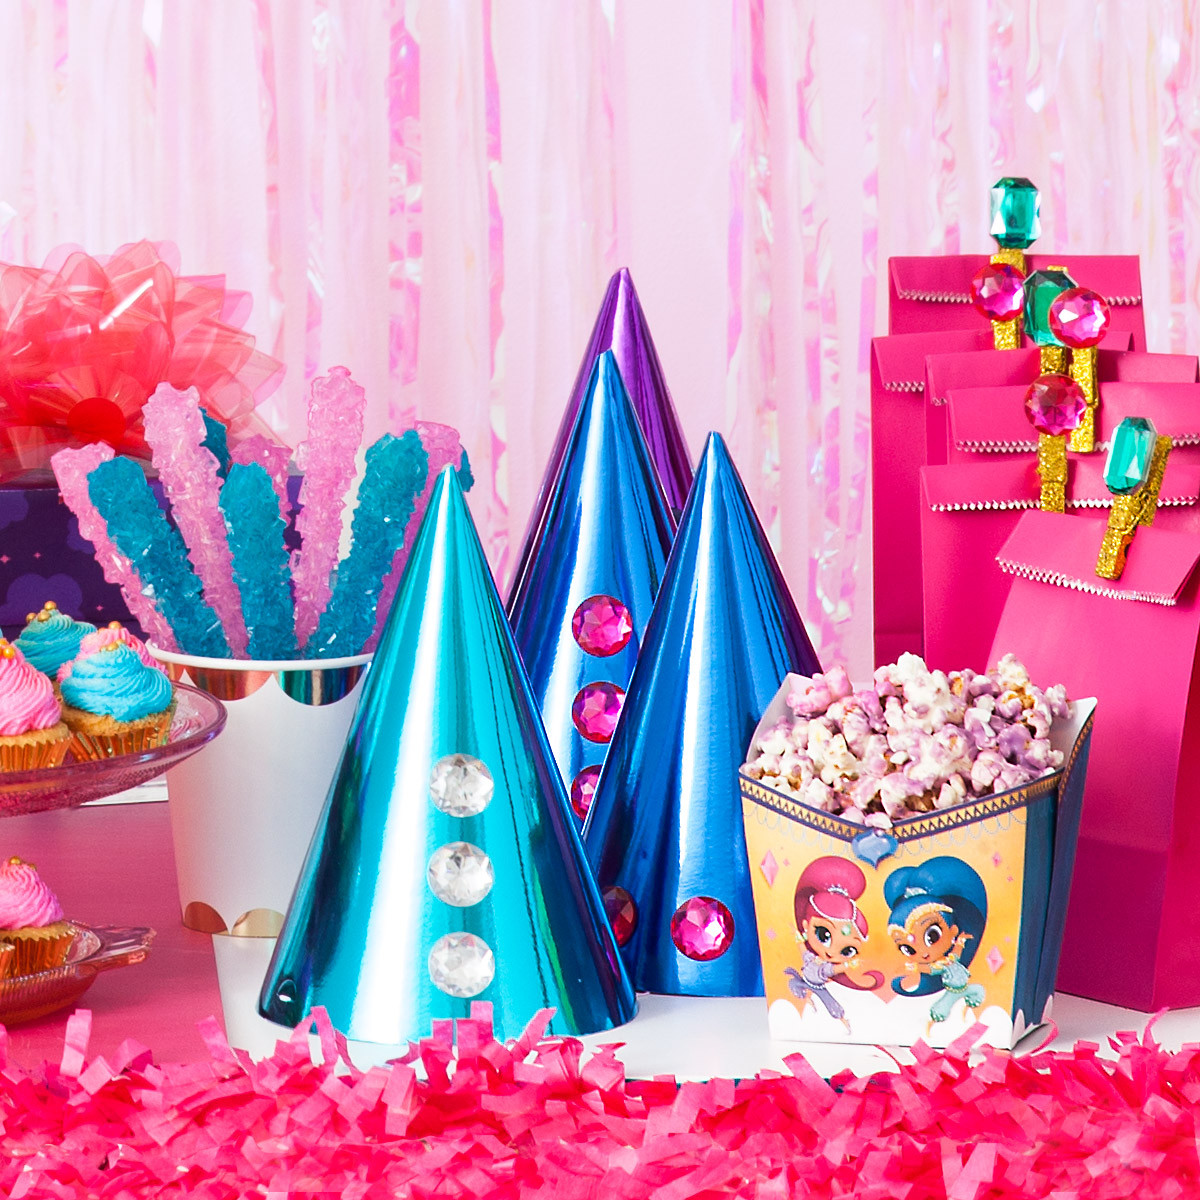 Shimmer And Shine Birthday Decorations
 Plan a Shimmer and Shine Birthday Party